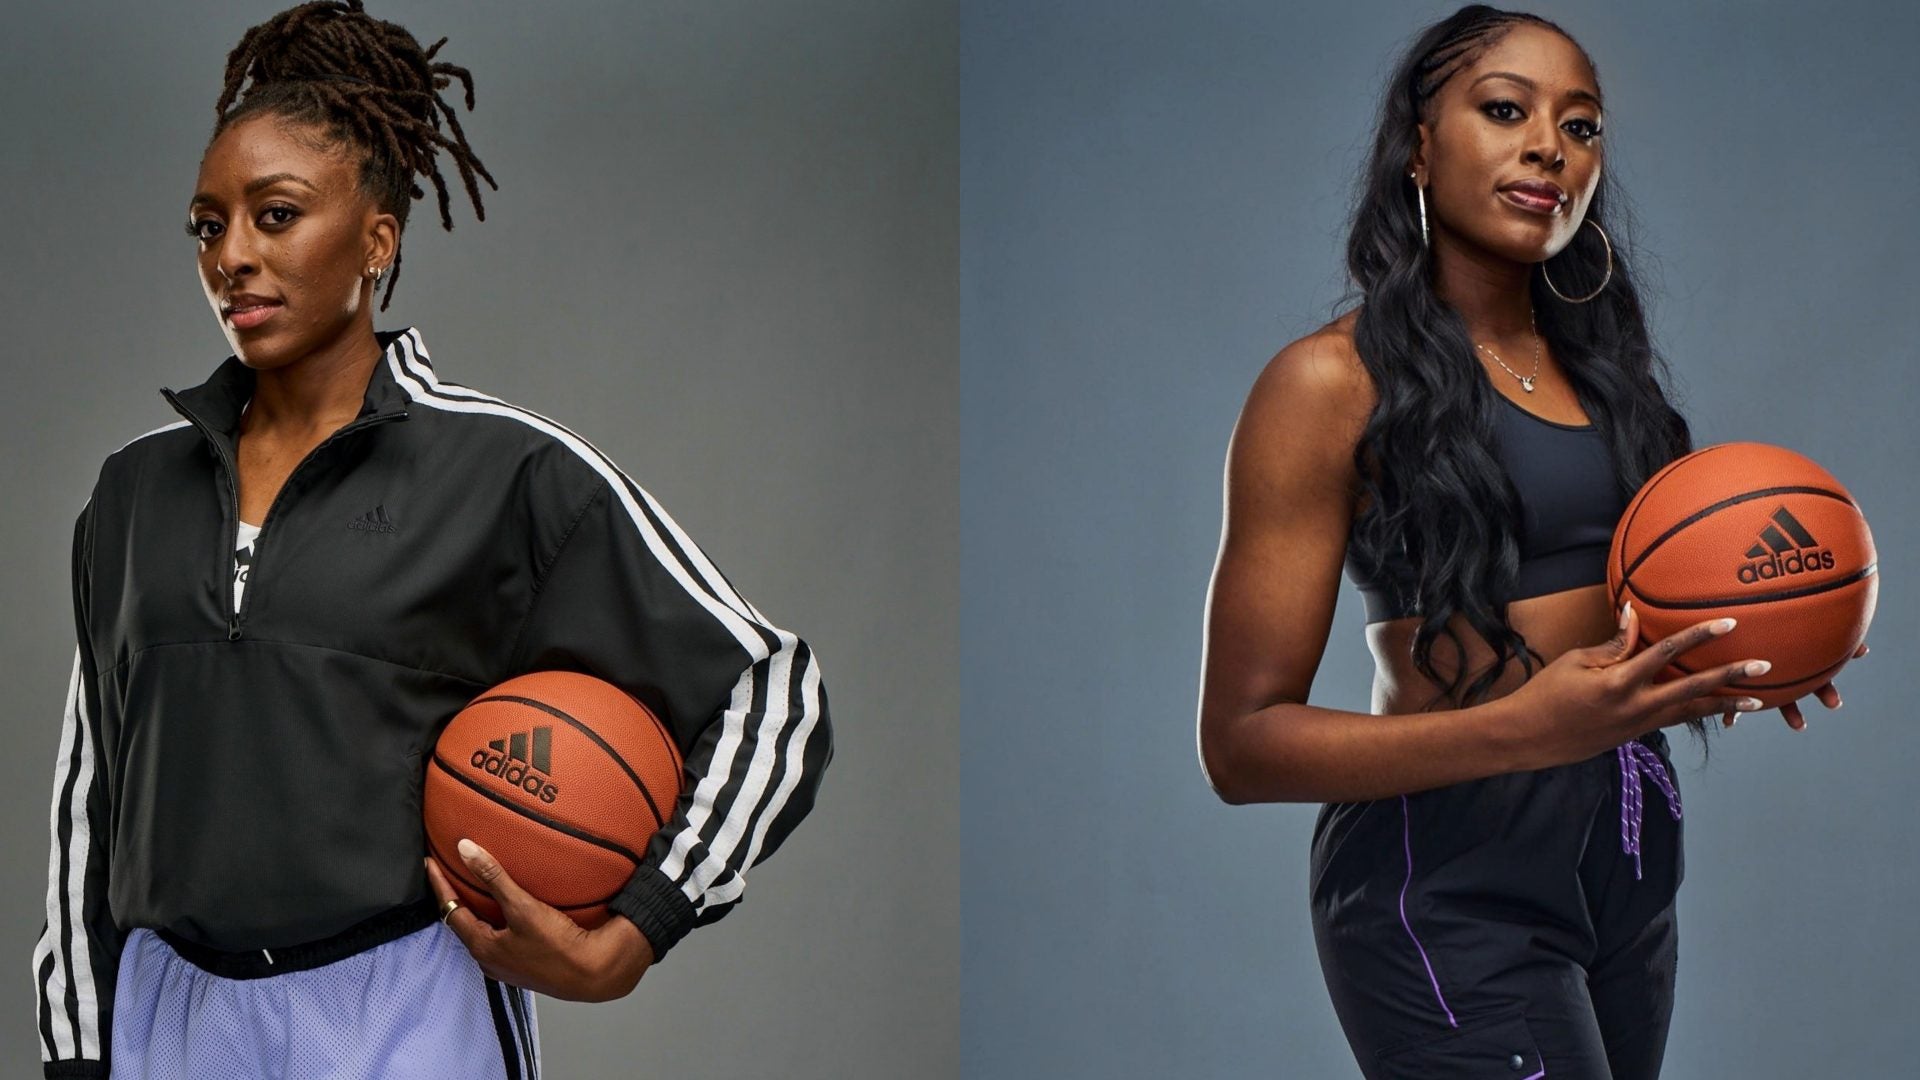 WNBA Players Chiney And Nneka Ogwumike Praise Black Women As "The Blueprint" For Streetwear Fashion